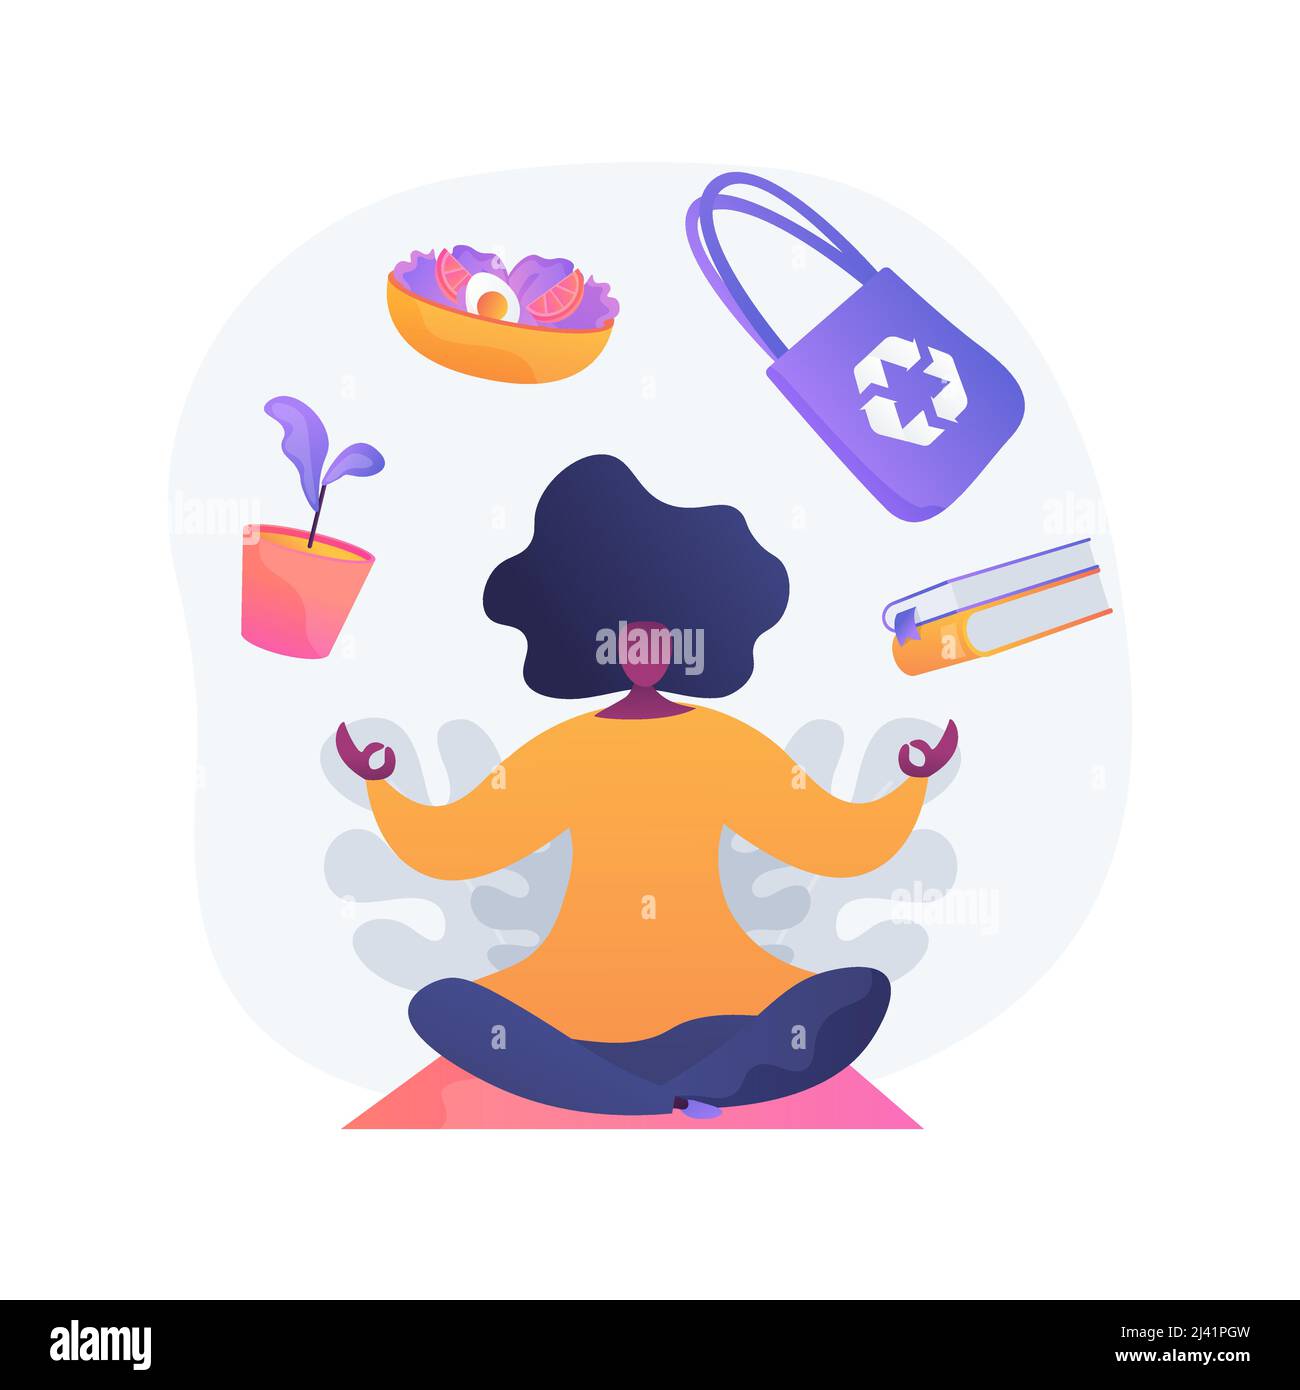 Minimalist lifestyle abstract concept vector illustration. Minimalist consumption, reduce buying, simple living, less financial burden, low expenses l Stock Vector